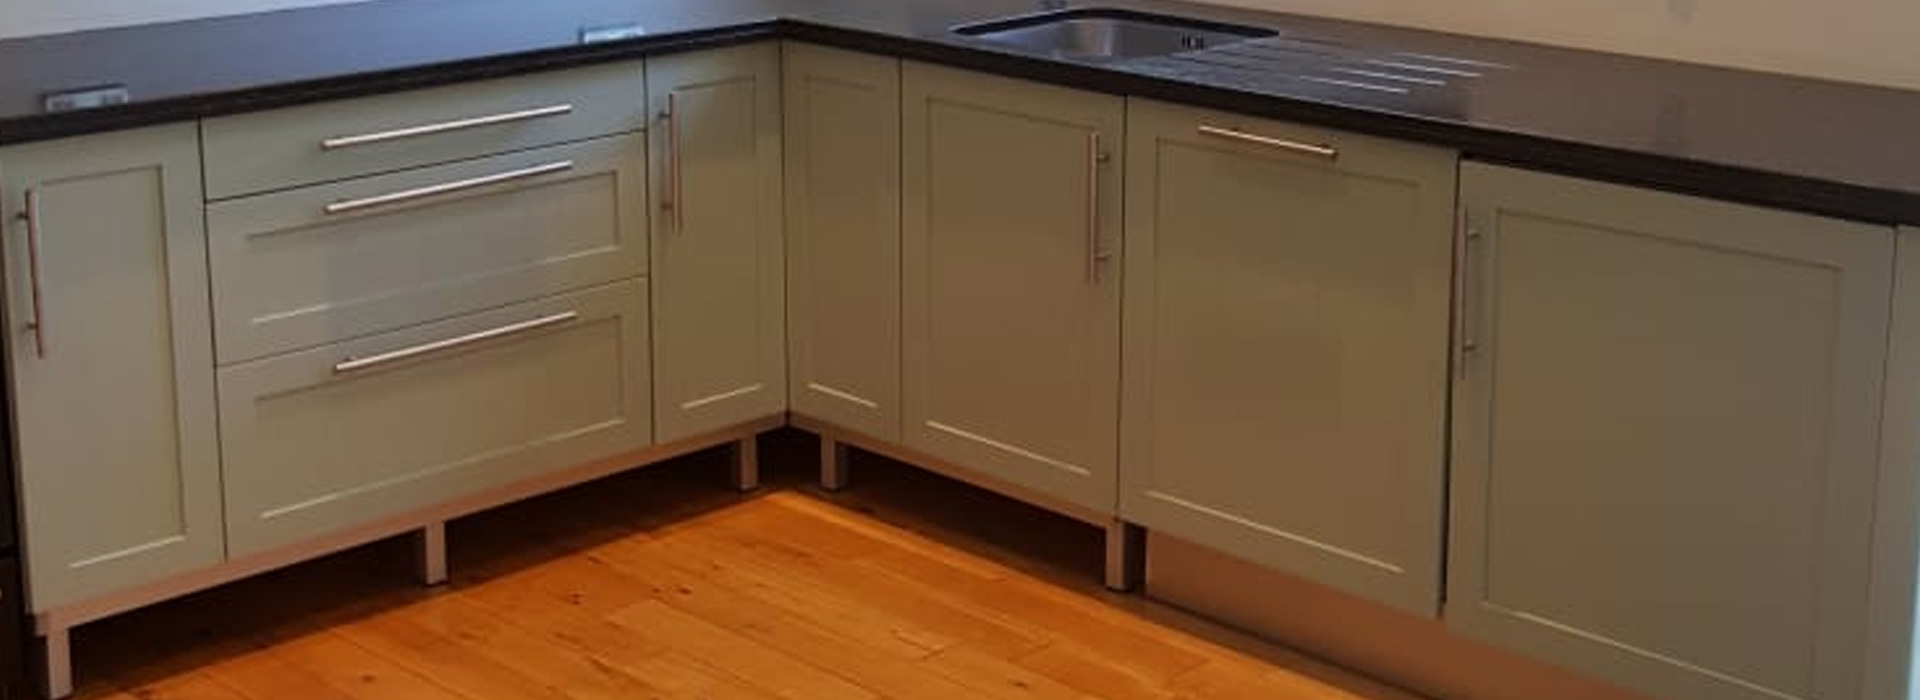 The basic model consists of respraying all the doors, drawer fronts plus plinths, gables, cornice and all facia work from The Kitchen Respray Company